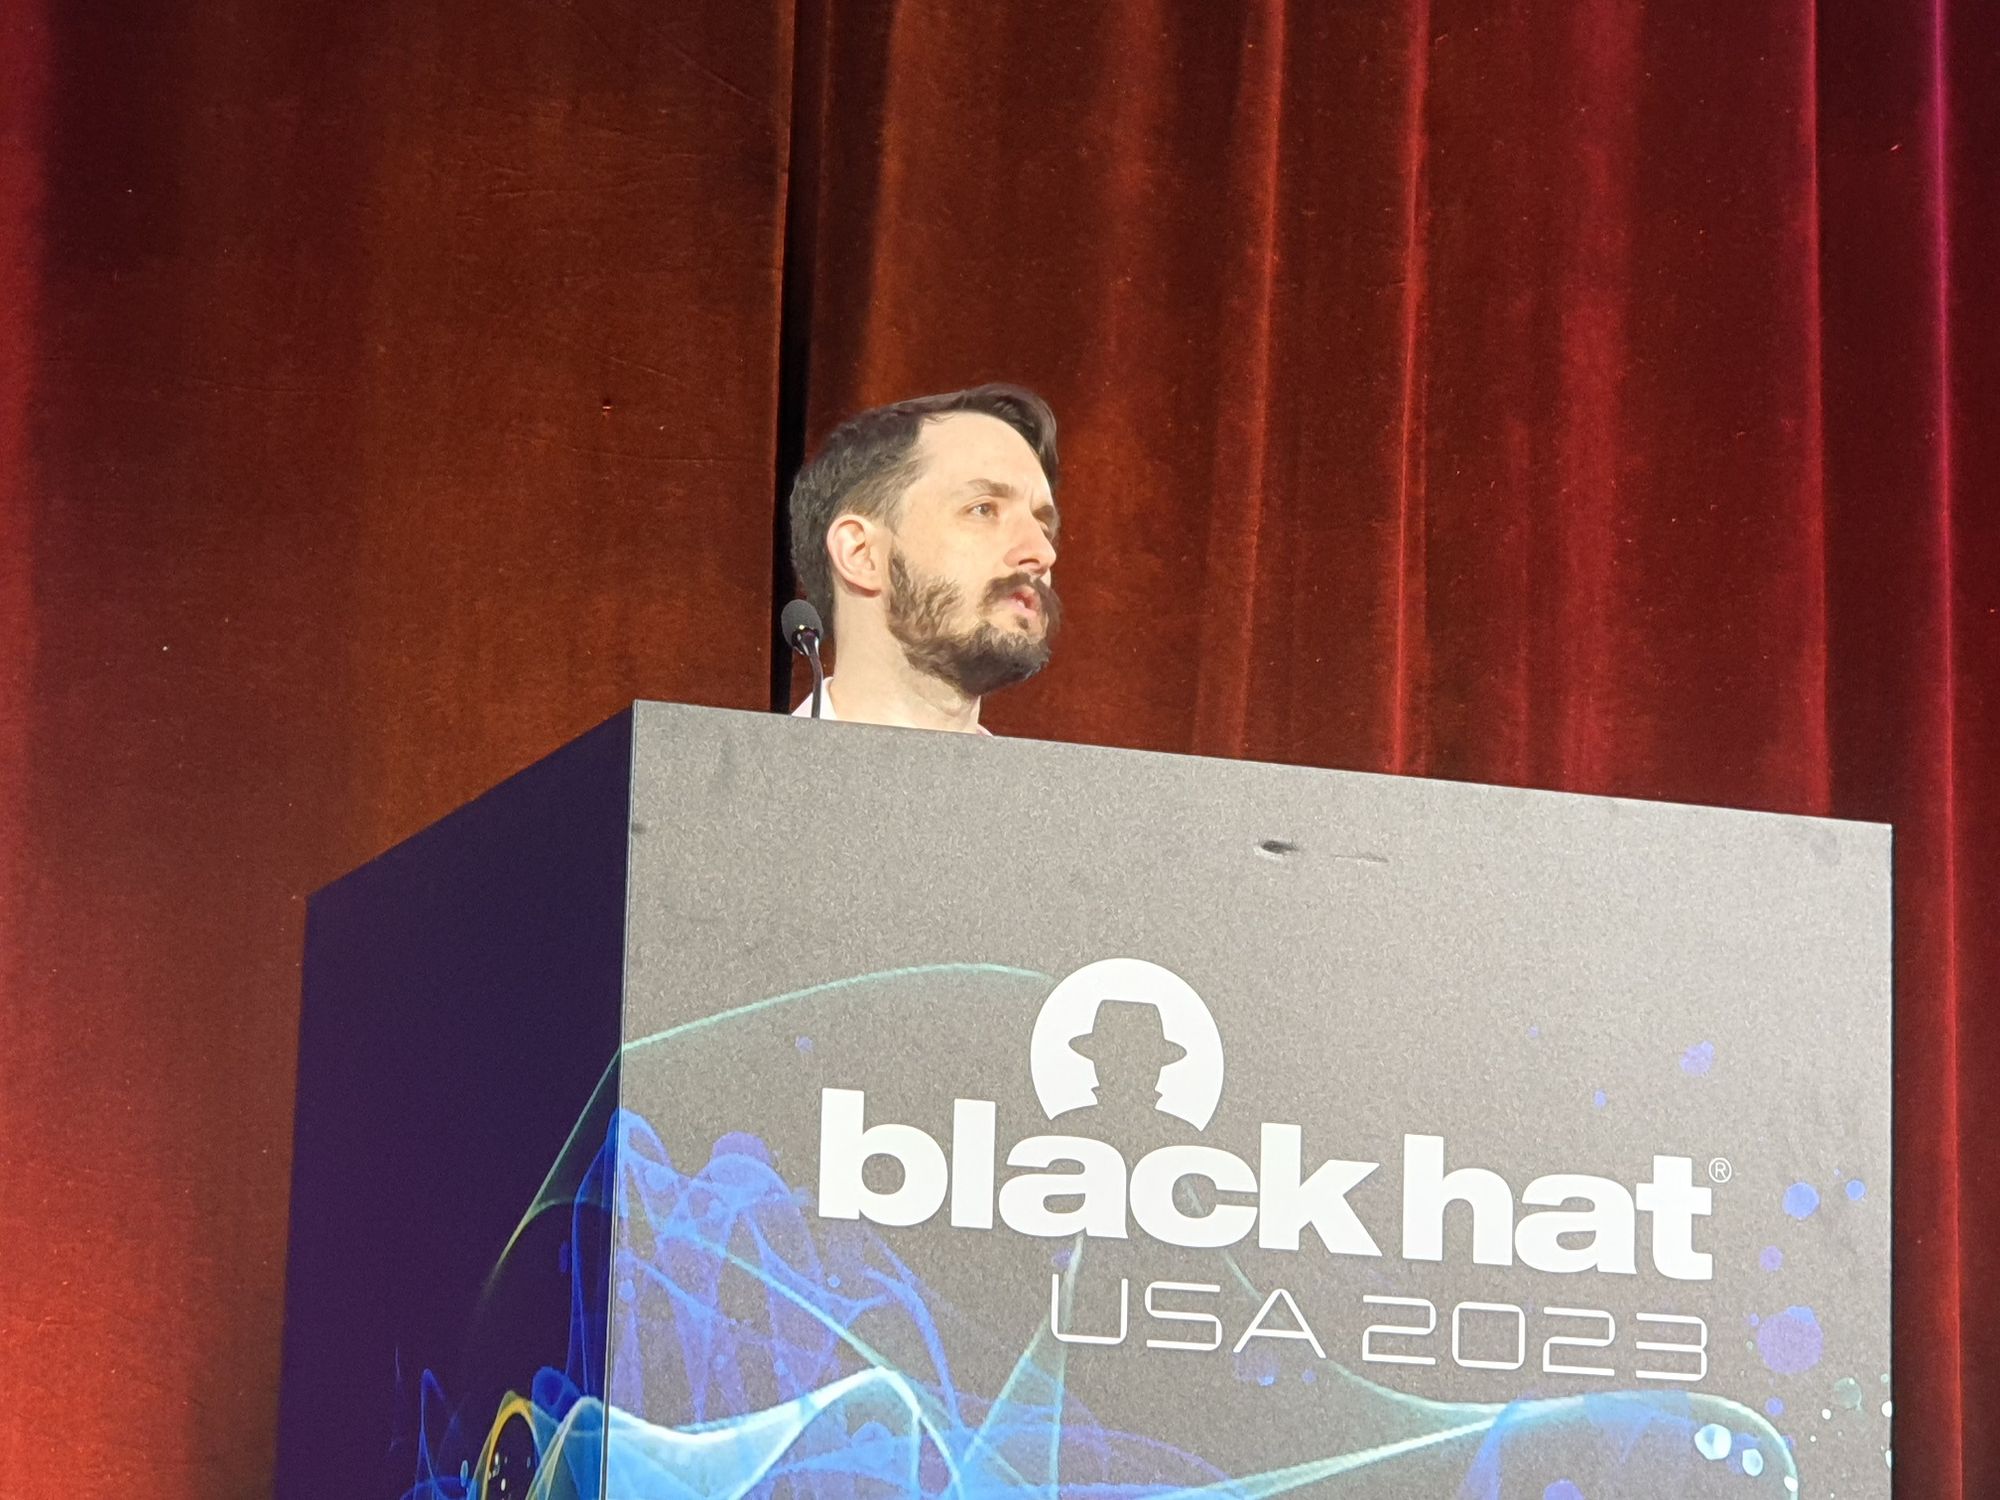 230810 Black Hat GitHub Swanson DO 1 - [Weekend Briefing] Security summer camps on the west coast